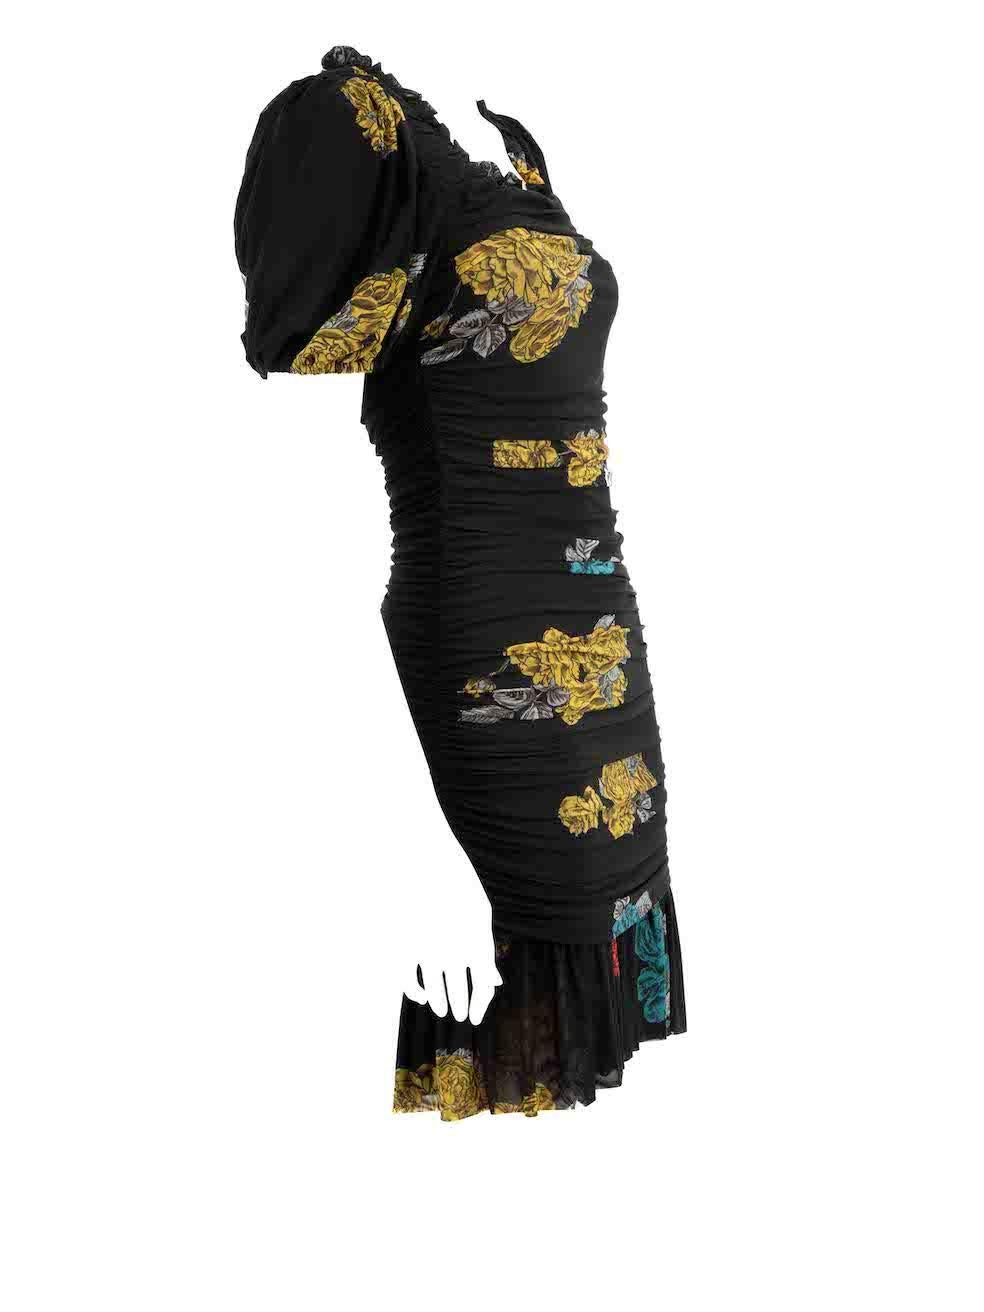 CONDITION is Very good. Hardly any visible wear to dress is evident on this used Ganni designer resale item.
 
 
 
 Details
 
 
 Black
 
 Synthetic
 
 Dress
 
 Floral pattern
 
 Round neck
 
 Short puff sleeves
 
 Mini
 
 Figure hugging feet
 
